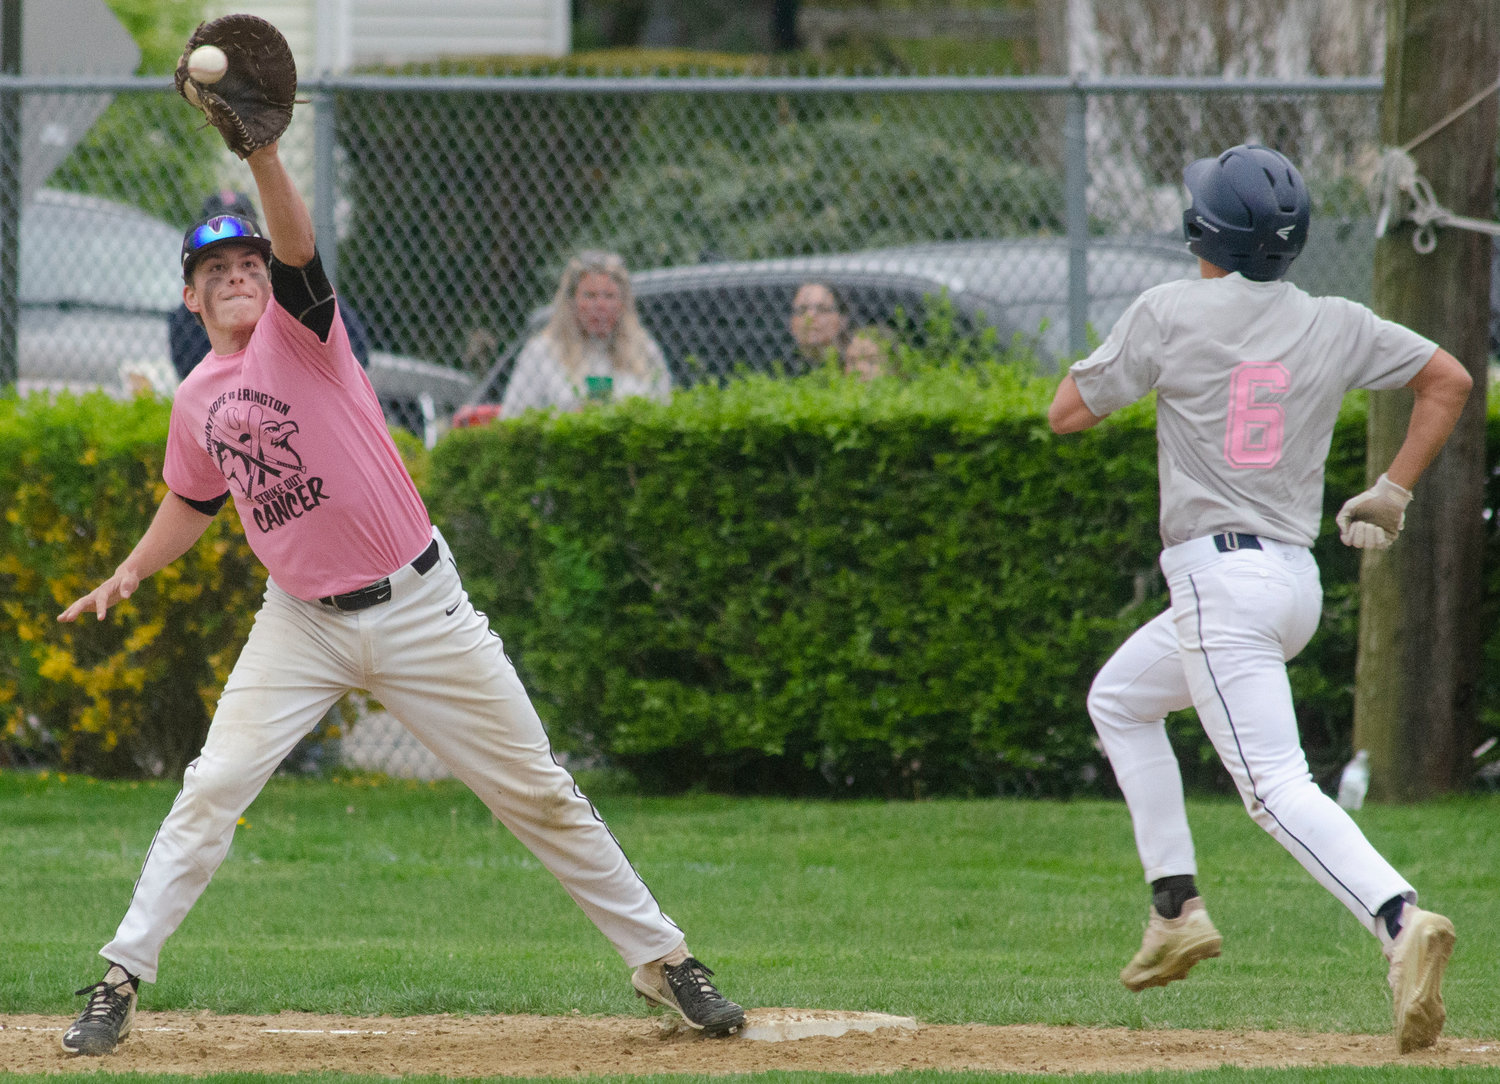 Matt Gale stretches to catch a throw by shortstop Dayton Van Amberg to beat Barrington runner JT Celico for an out during the Huskies Strike-Out Cancer fundraiser game on Friday.